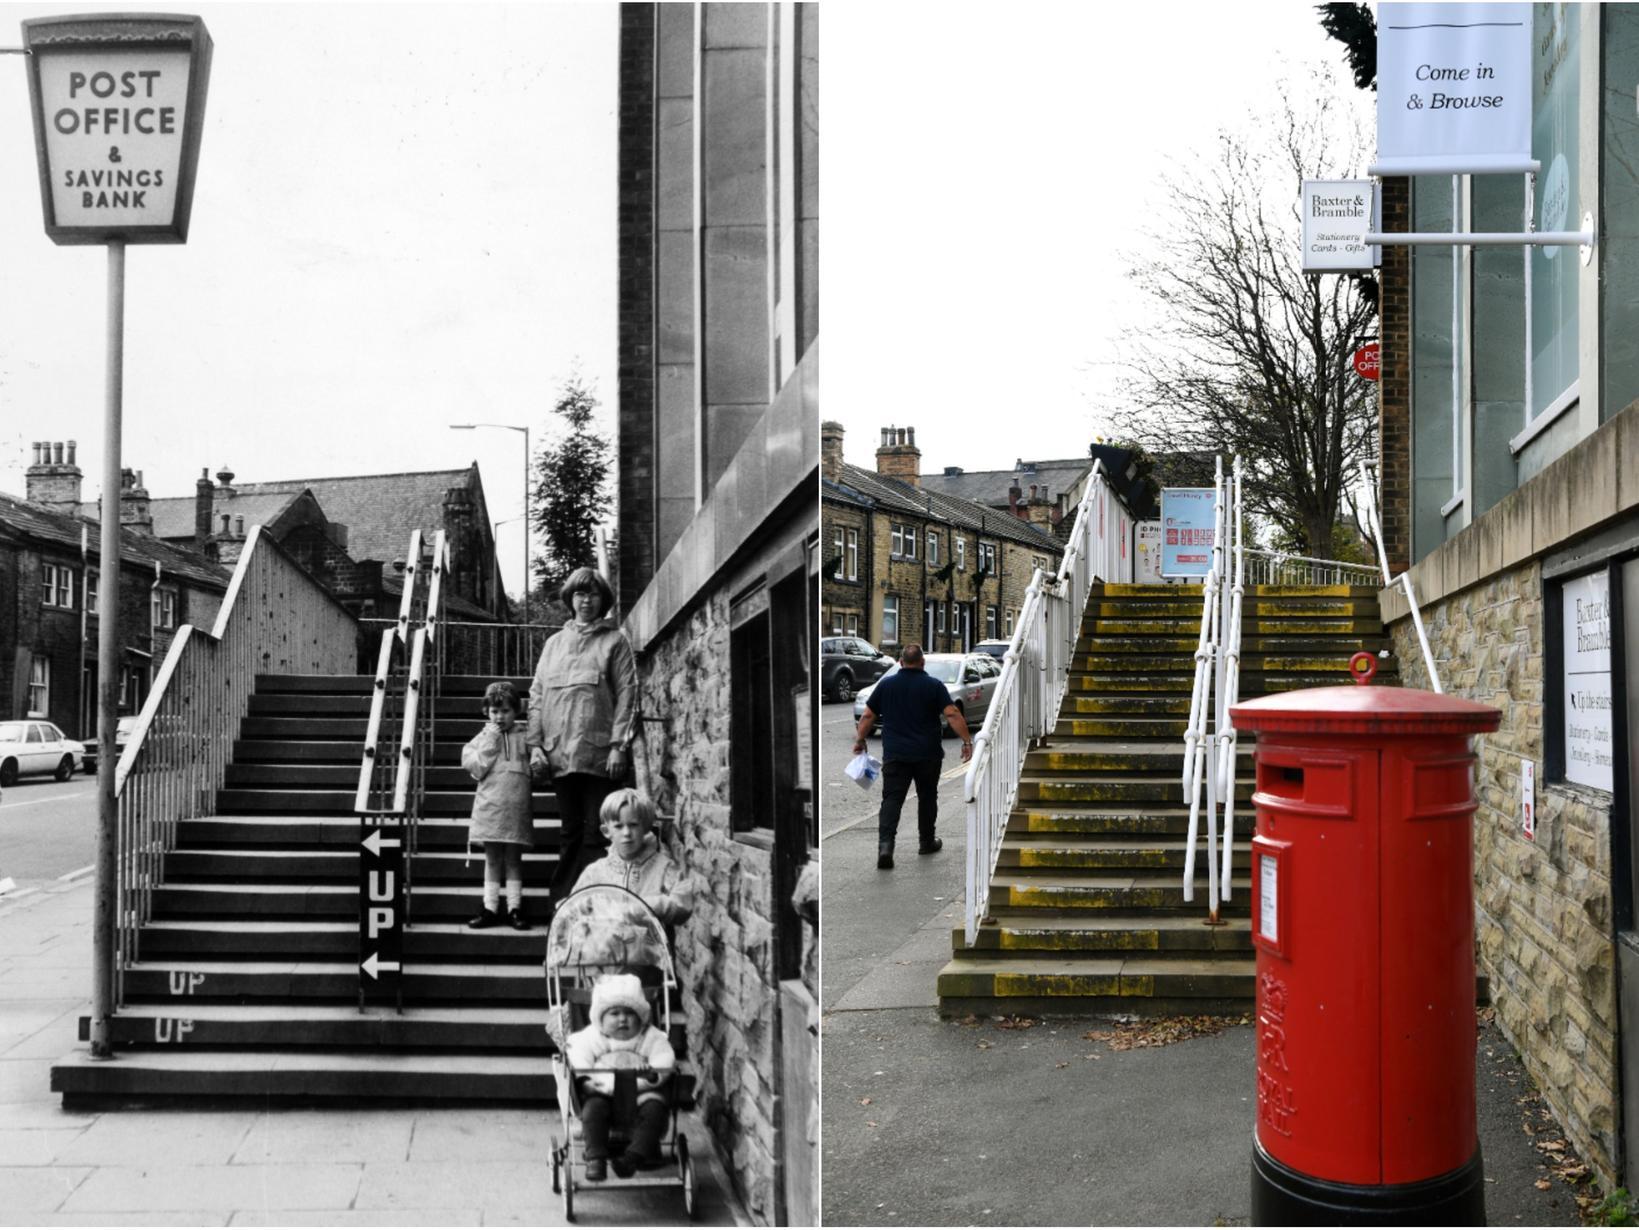 Pudsey Post Office in 1978 and now in 2019